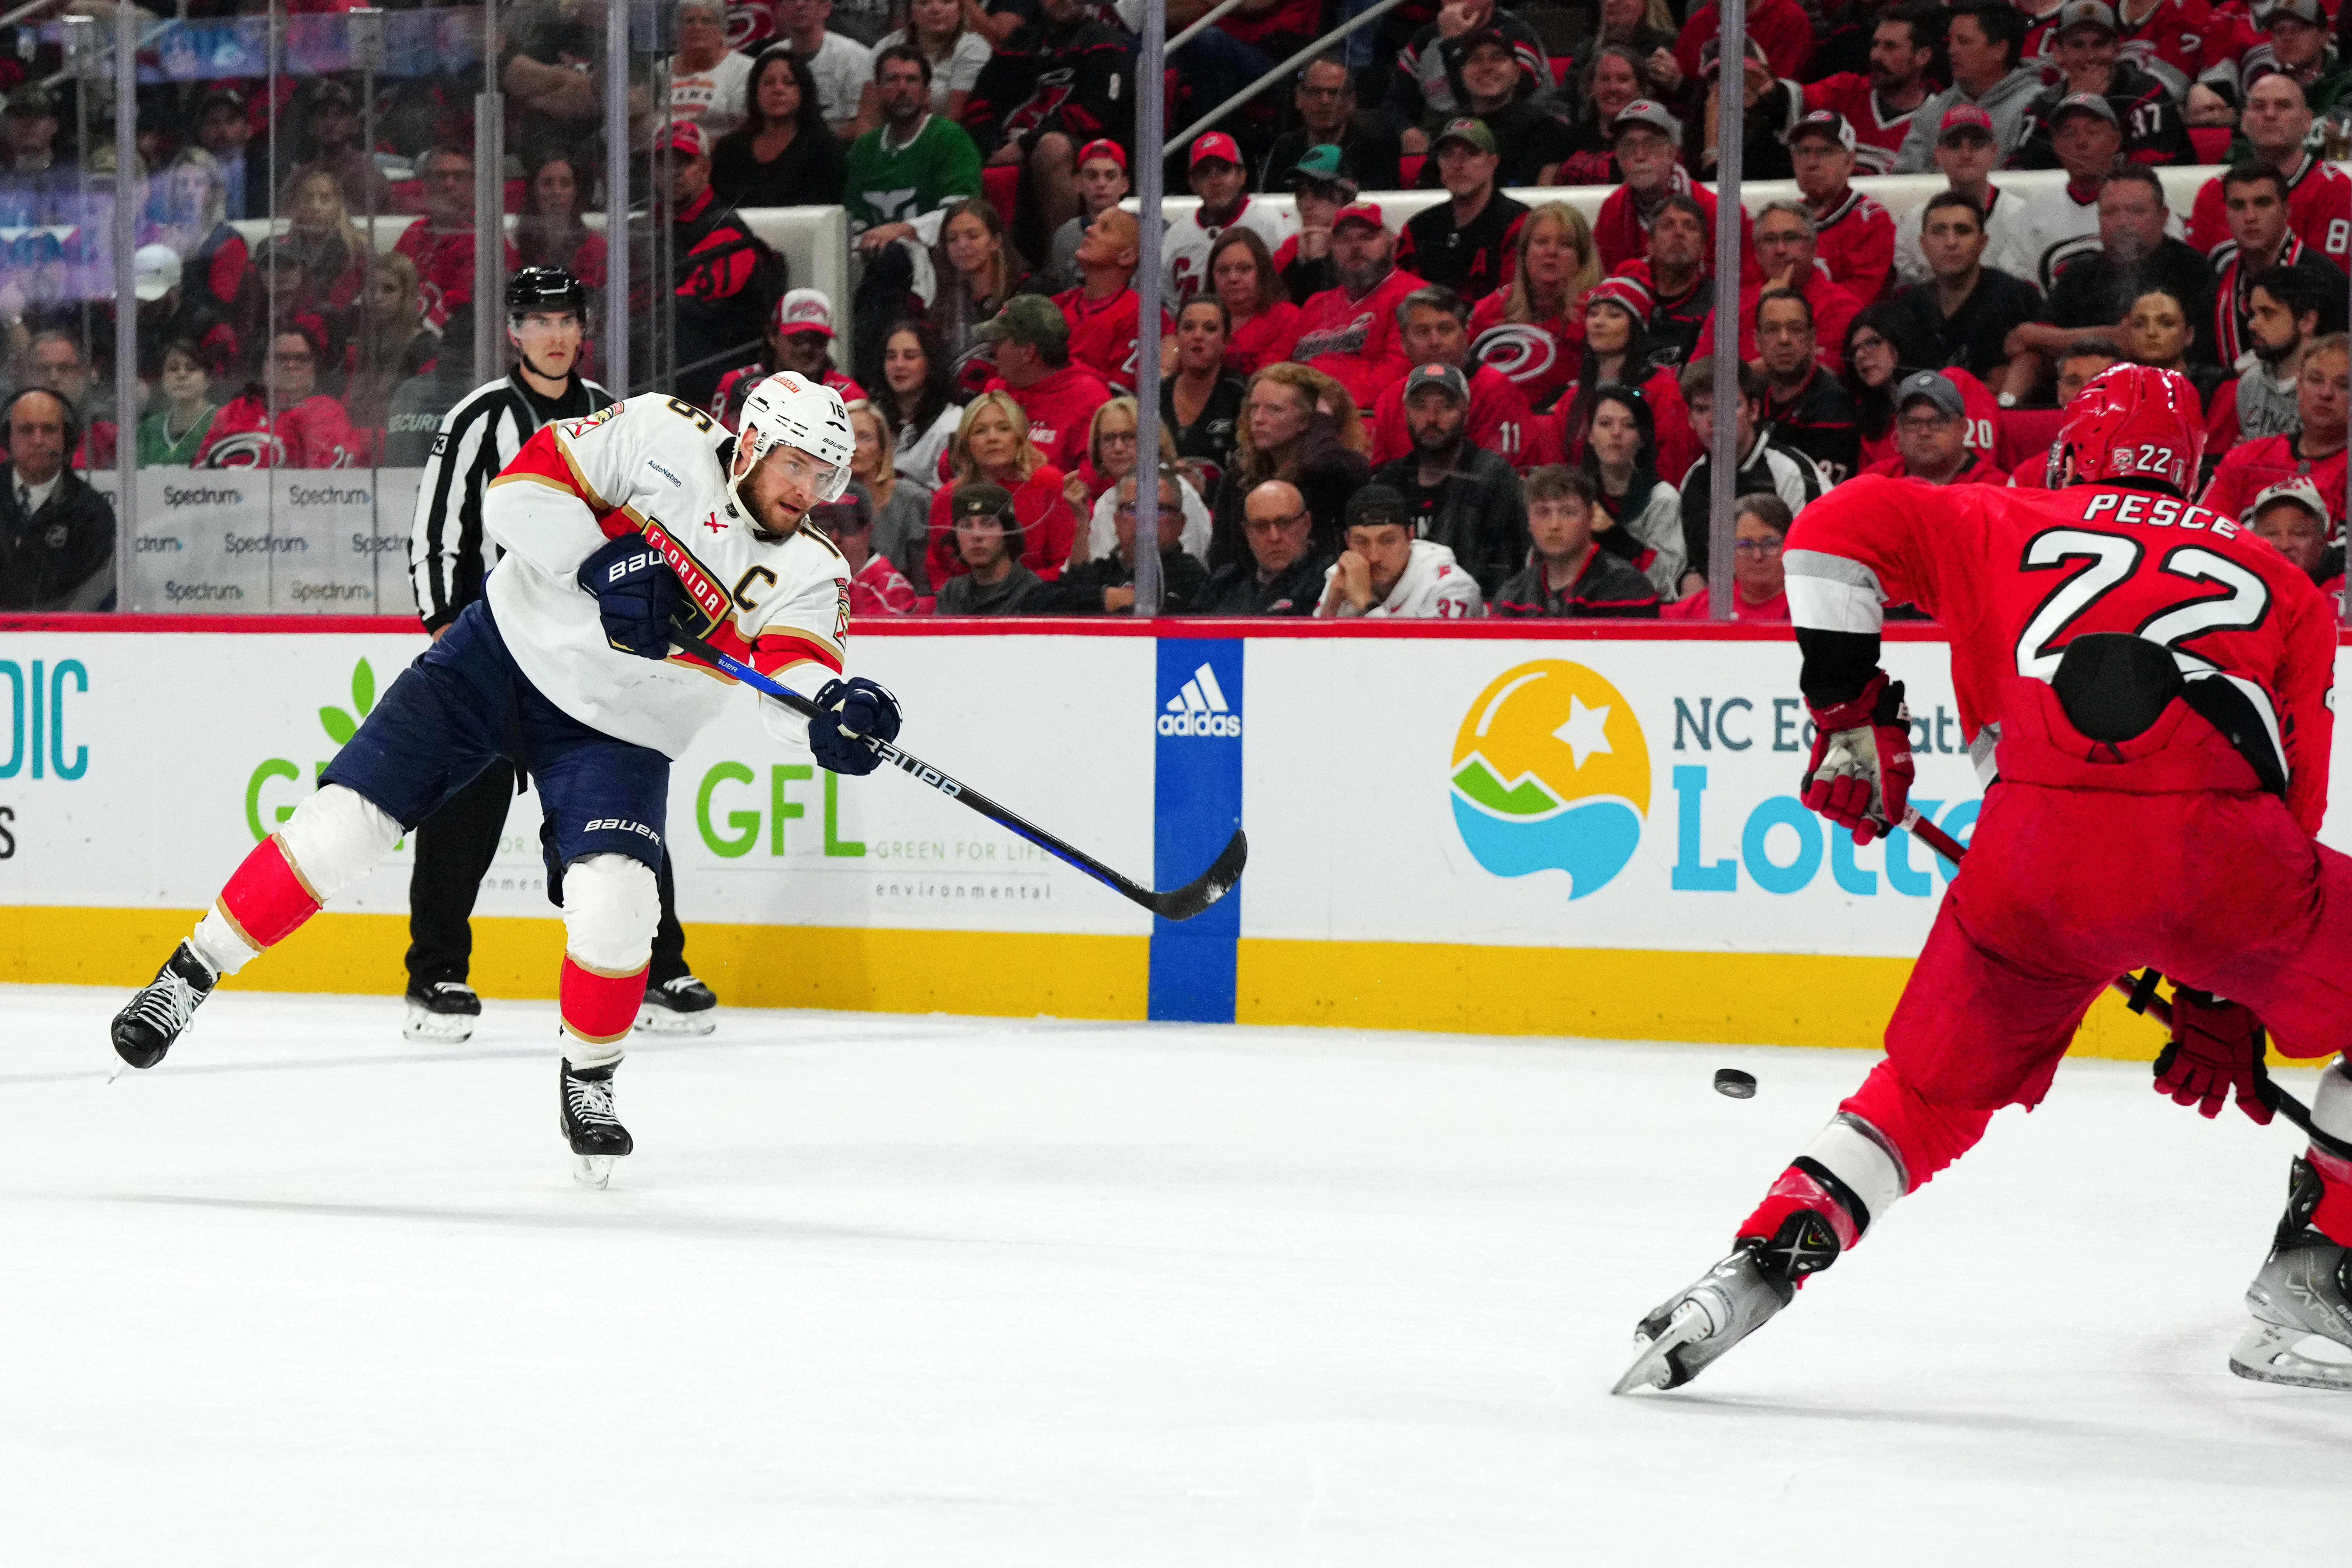 Florida Panthers: When Will the Stadium Series Make its Way Down